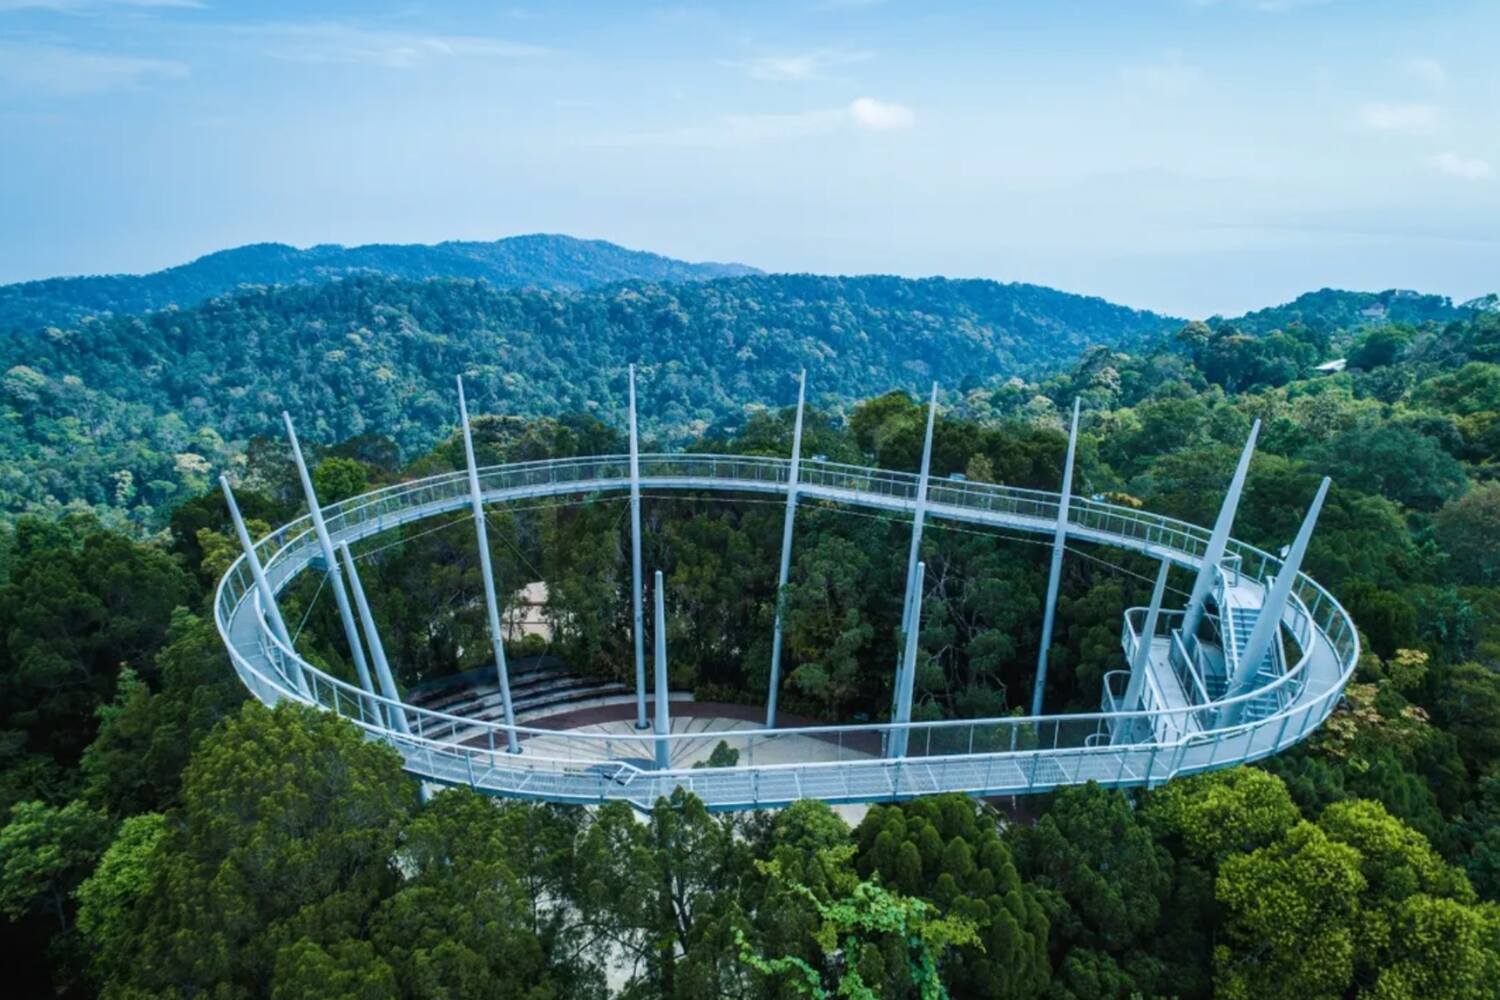 Circular treetop walkway in a lush forest with tall support pillars.